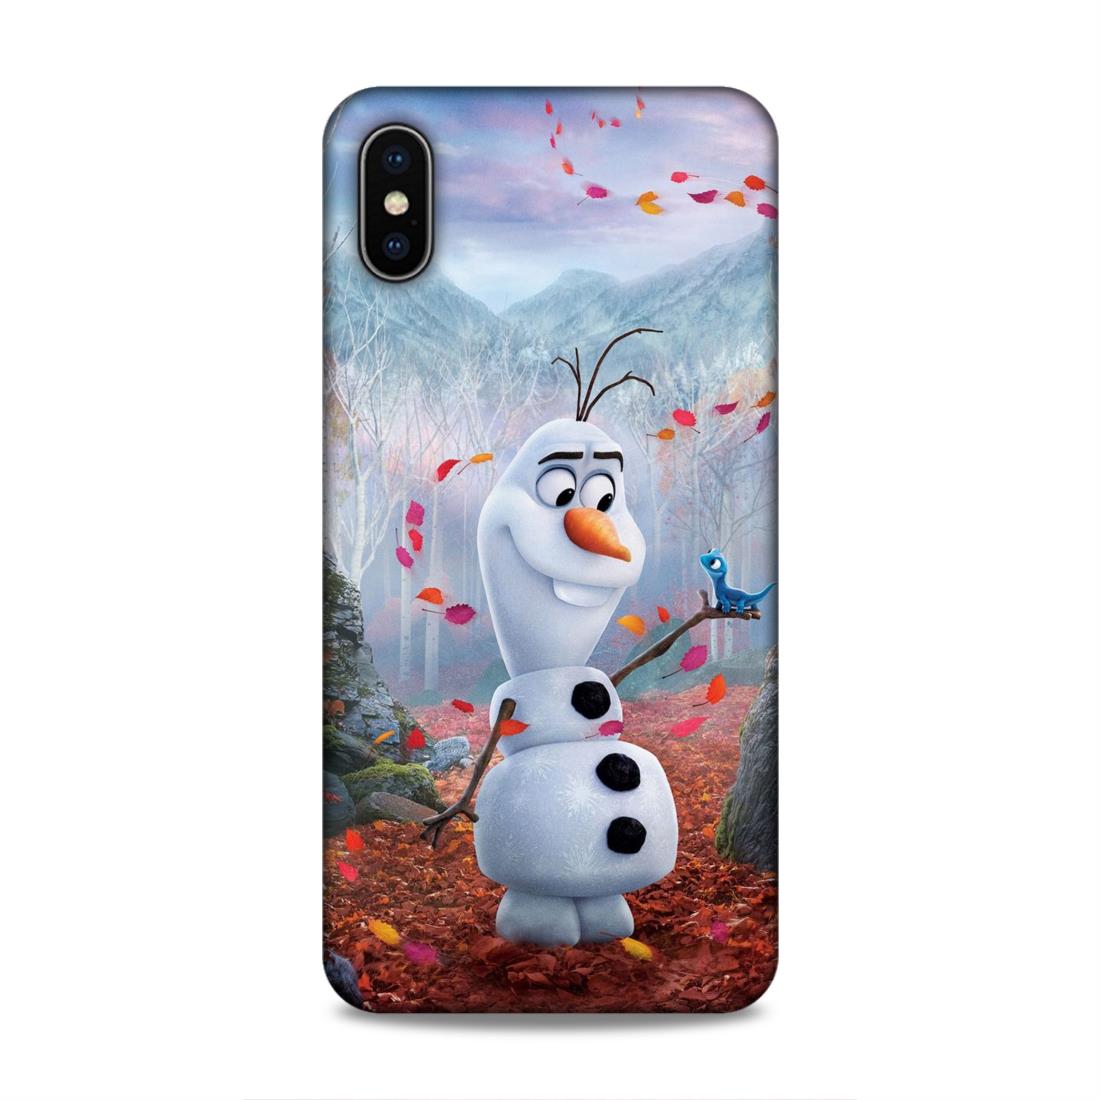 Olaf Hard Back Case For Apple iPhone XS Max